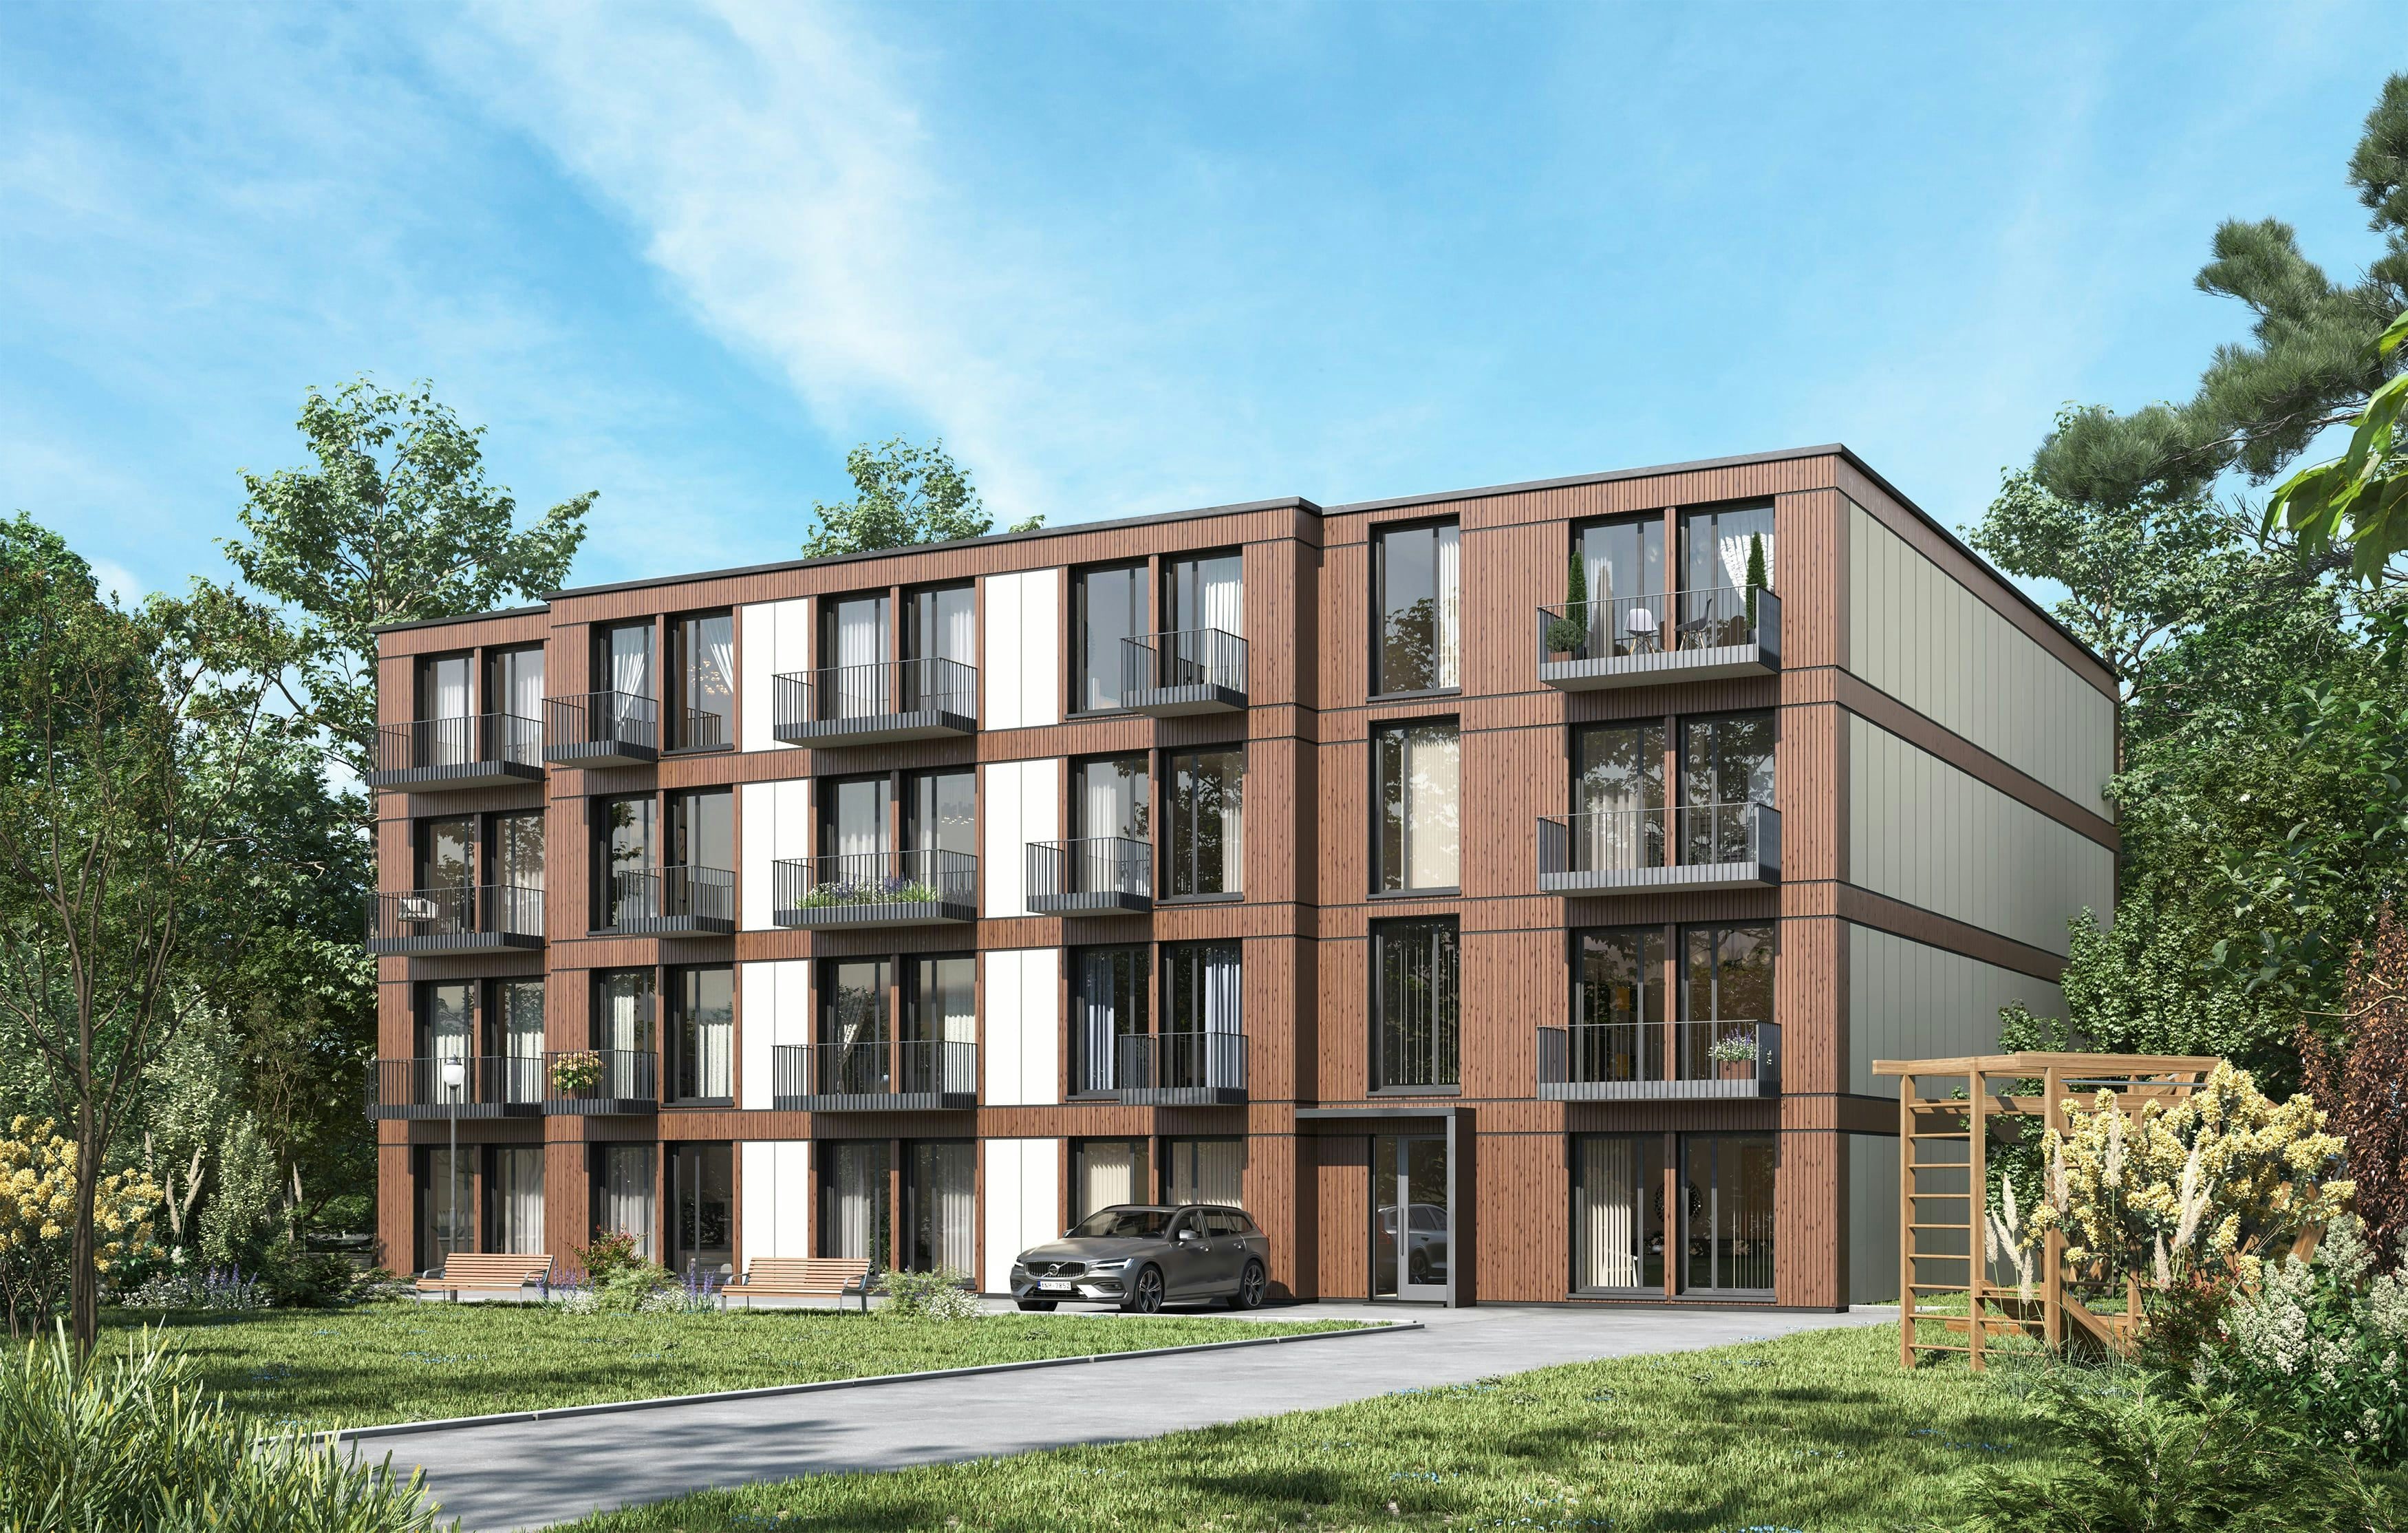 3D Exterior Architectural Visualization of prefabricated modular multi family house in Germany